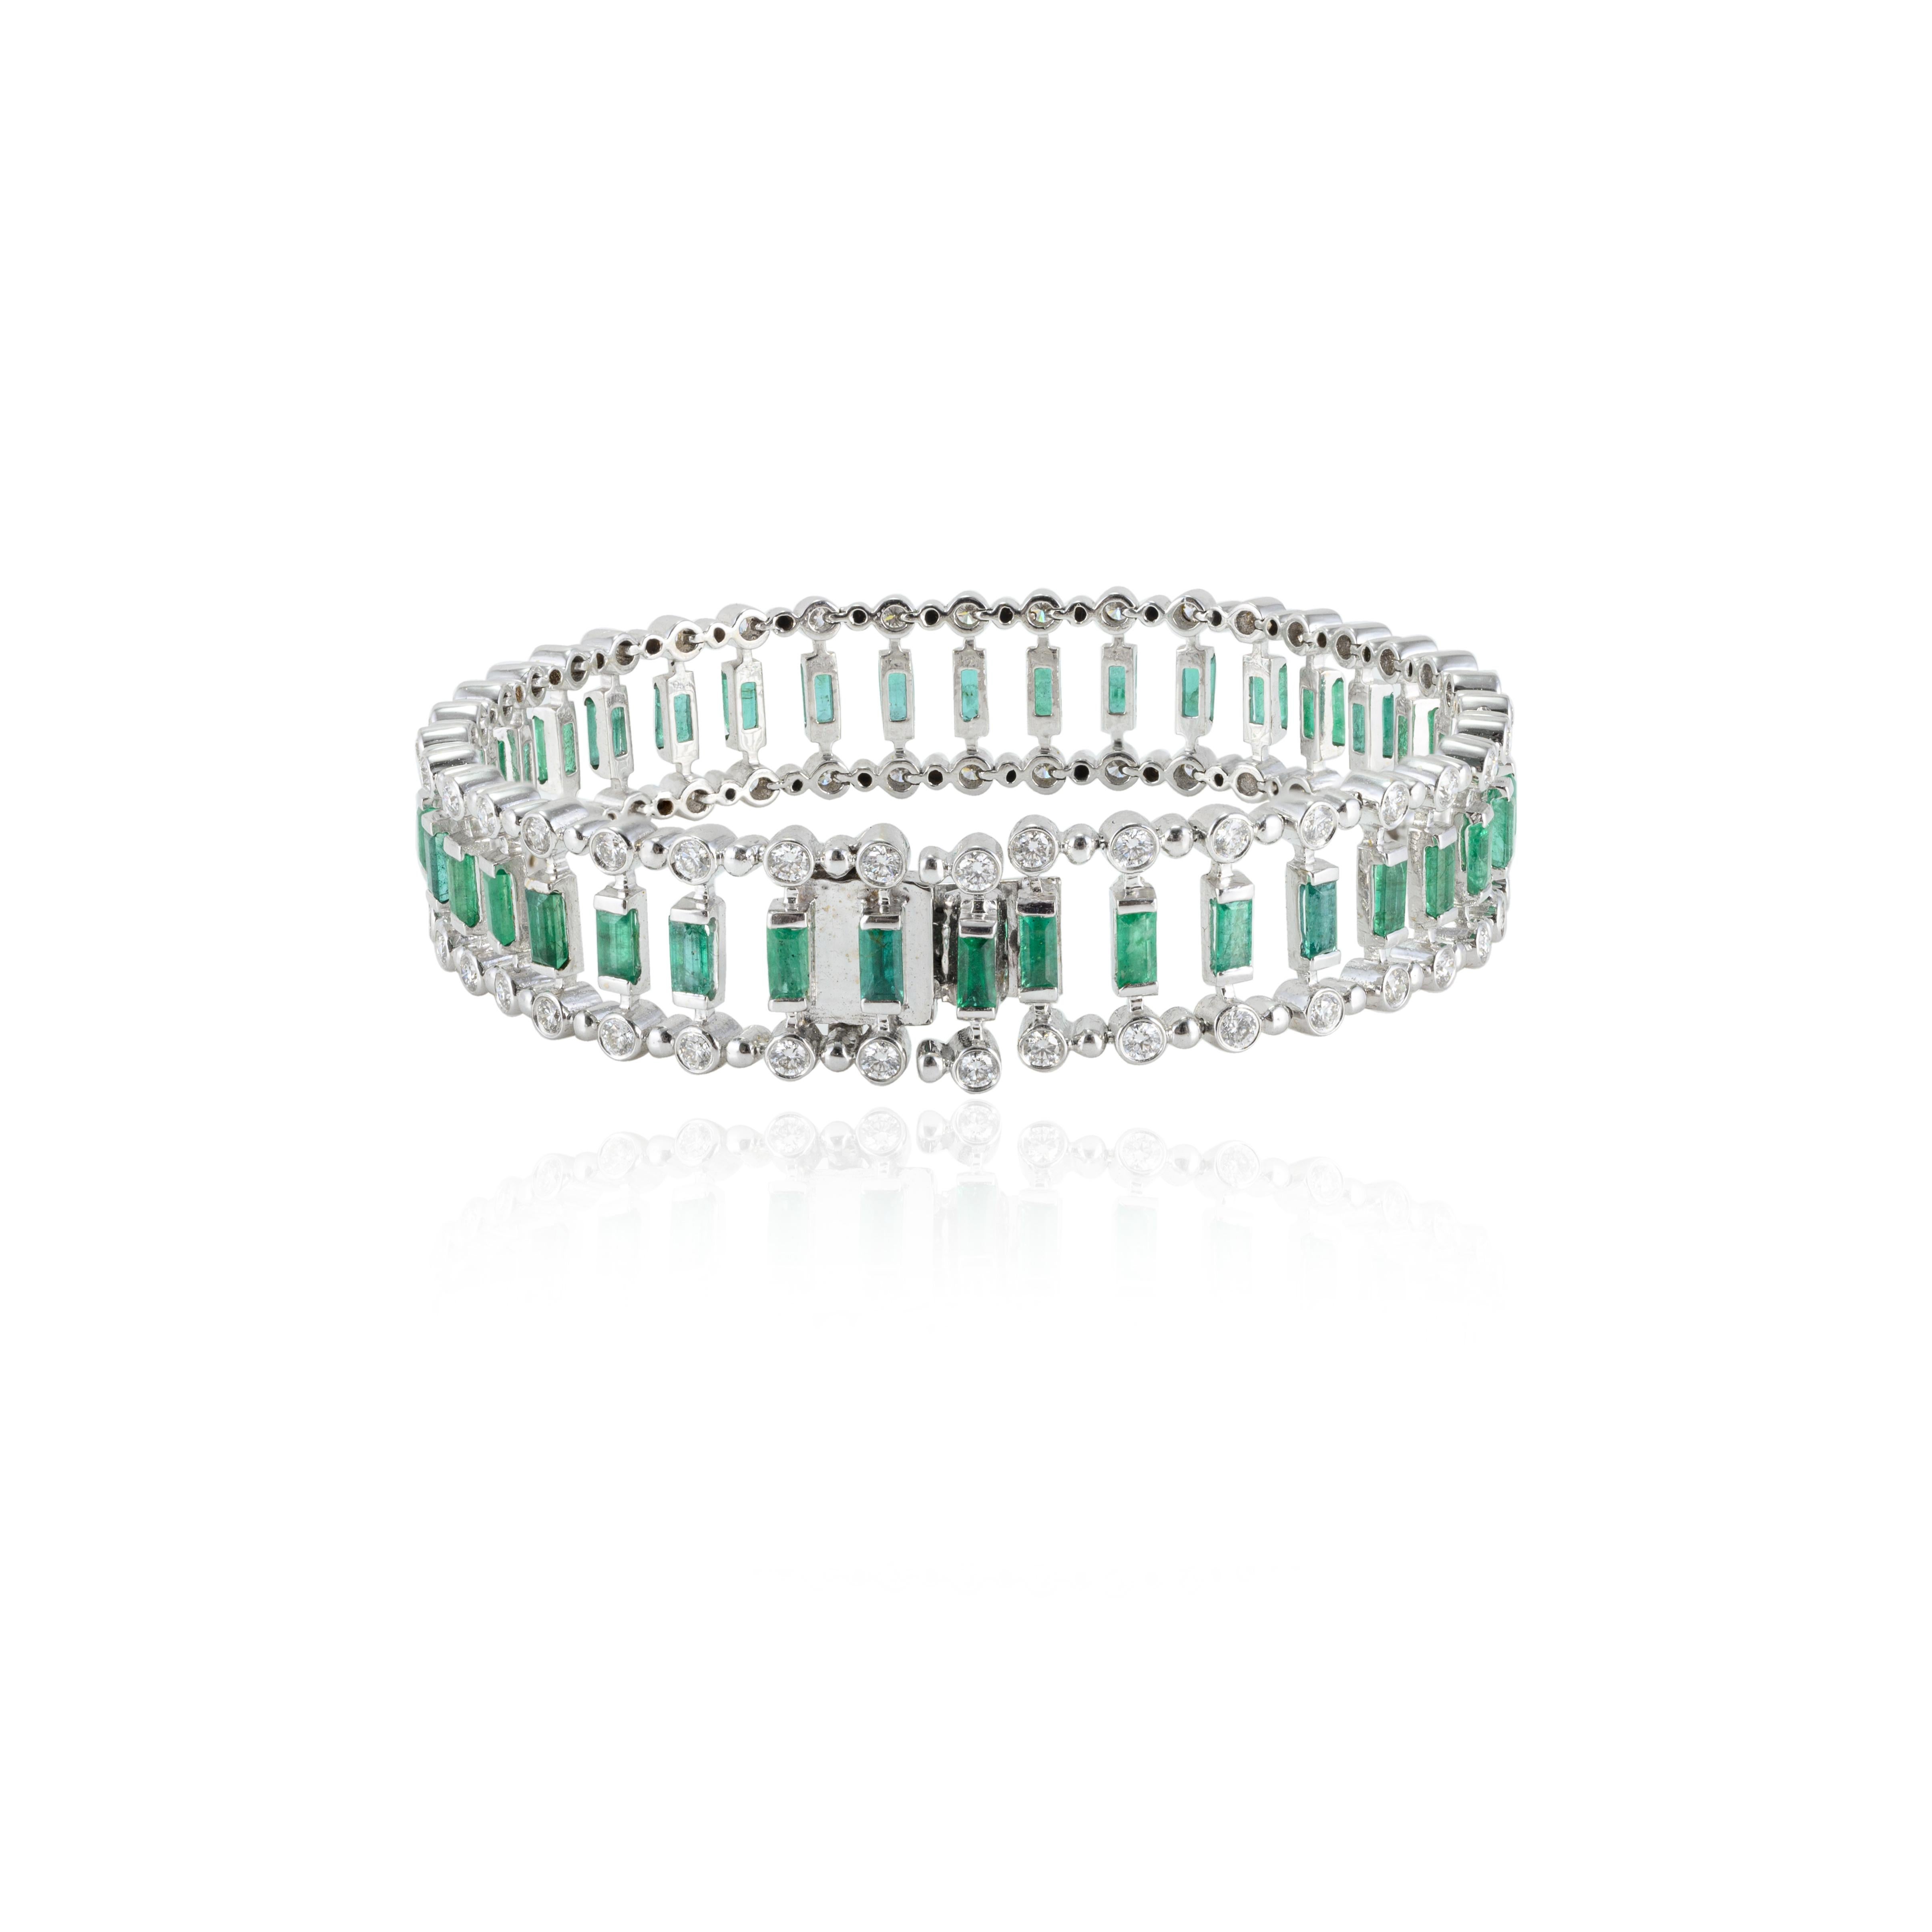 This Baguette Real Emerald and Diamond Wedding Bracelet in 18K gold showcases endlessly sparkling natural emerald, weighing 4.37 carat and diamonds weighing 2.1 carat. It measures 6.5 inches long in length. 
Emerald enhances intellectual capacity of